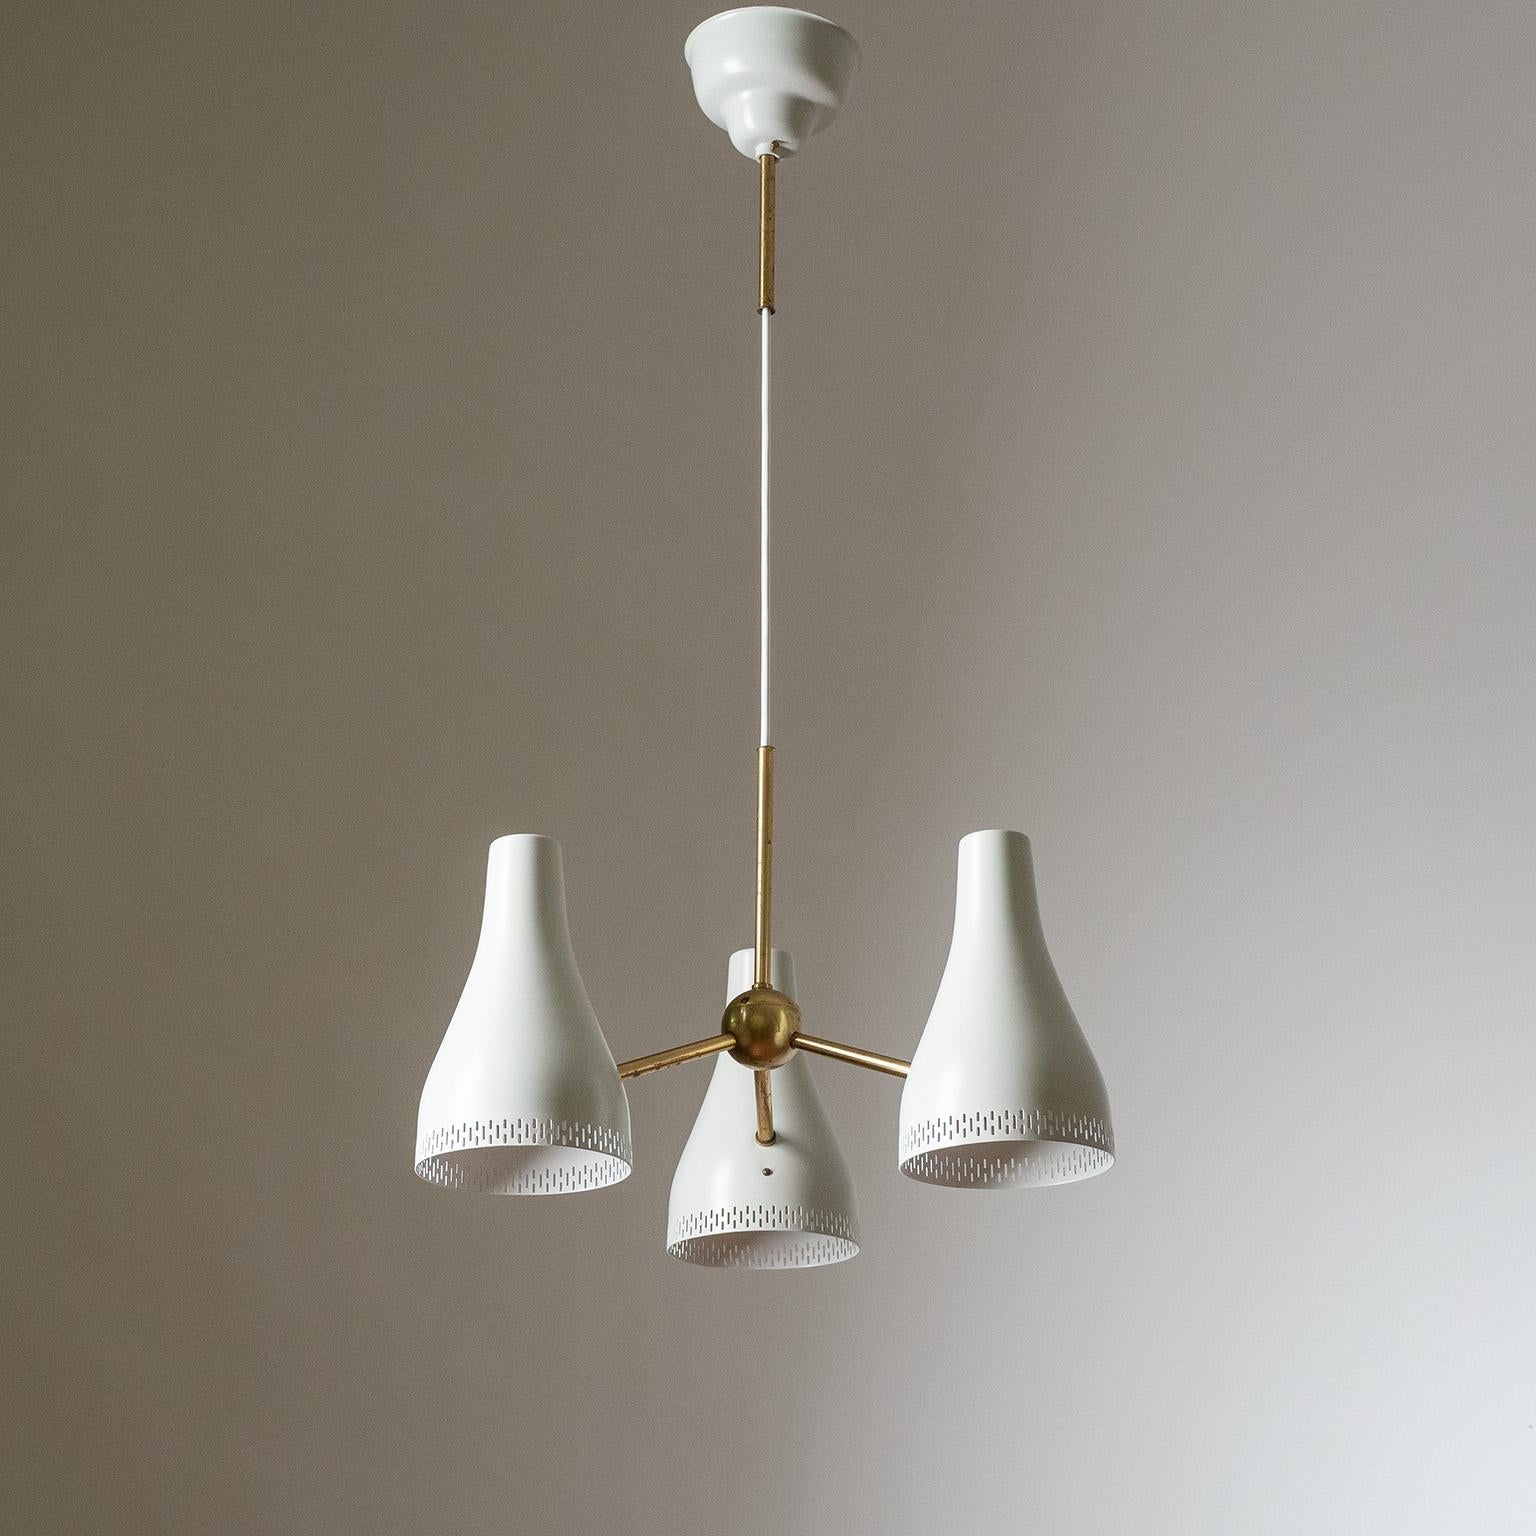 Rare three-cone pendant designed by Hans Bergström for ASEA in the 1950s. Emanating from a small brass globe are three lacquered aluminum cones with three rows of perforations each. The cones and canopy have been professionally repainted in their